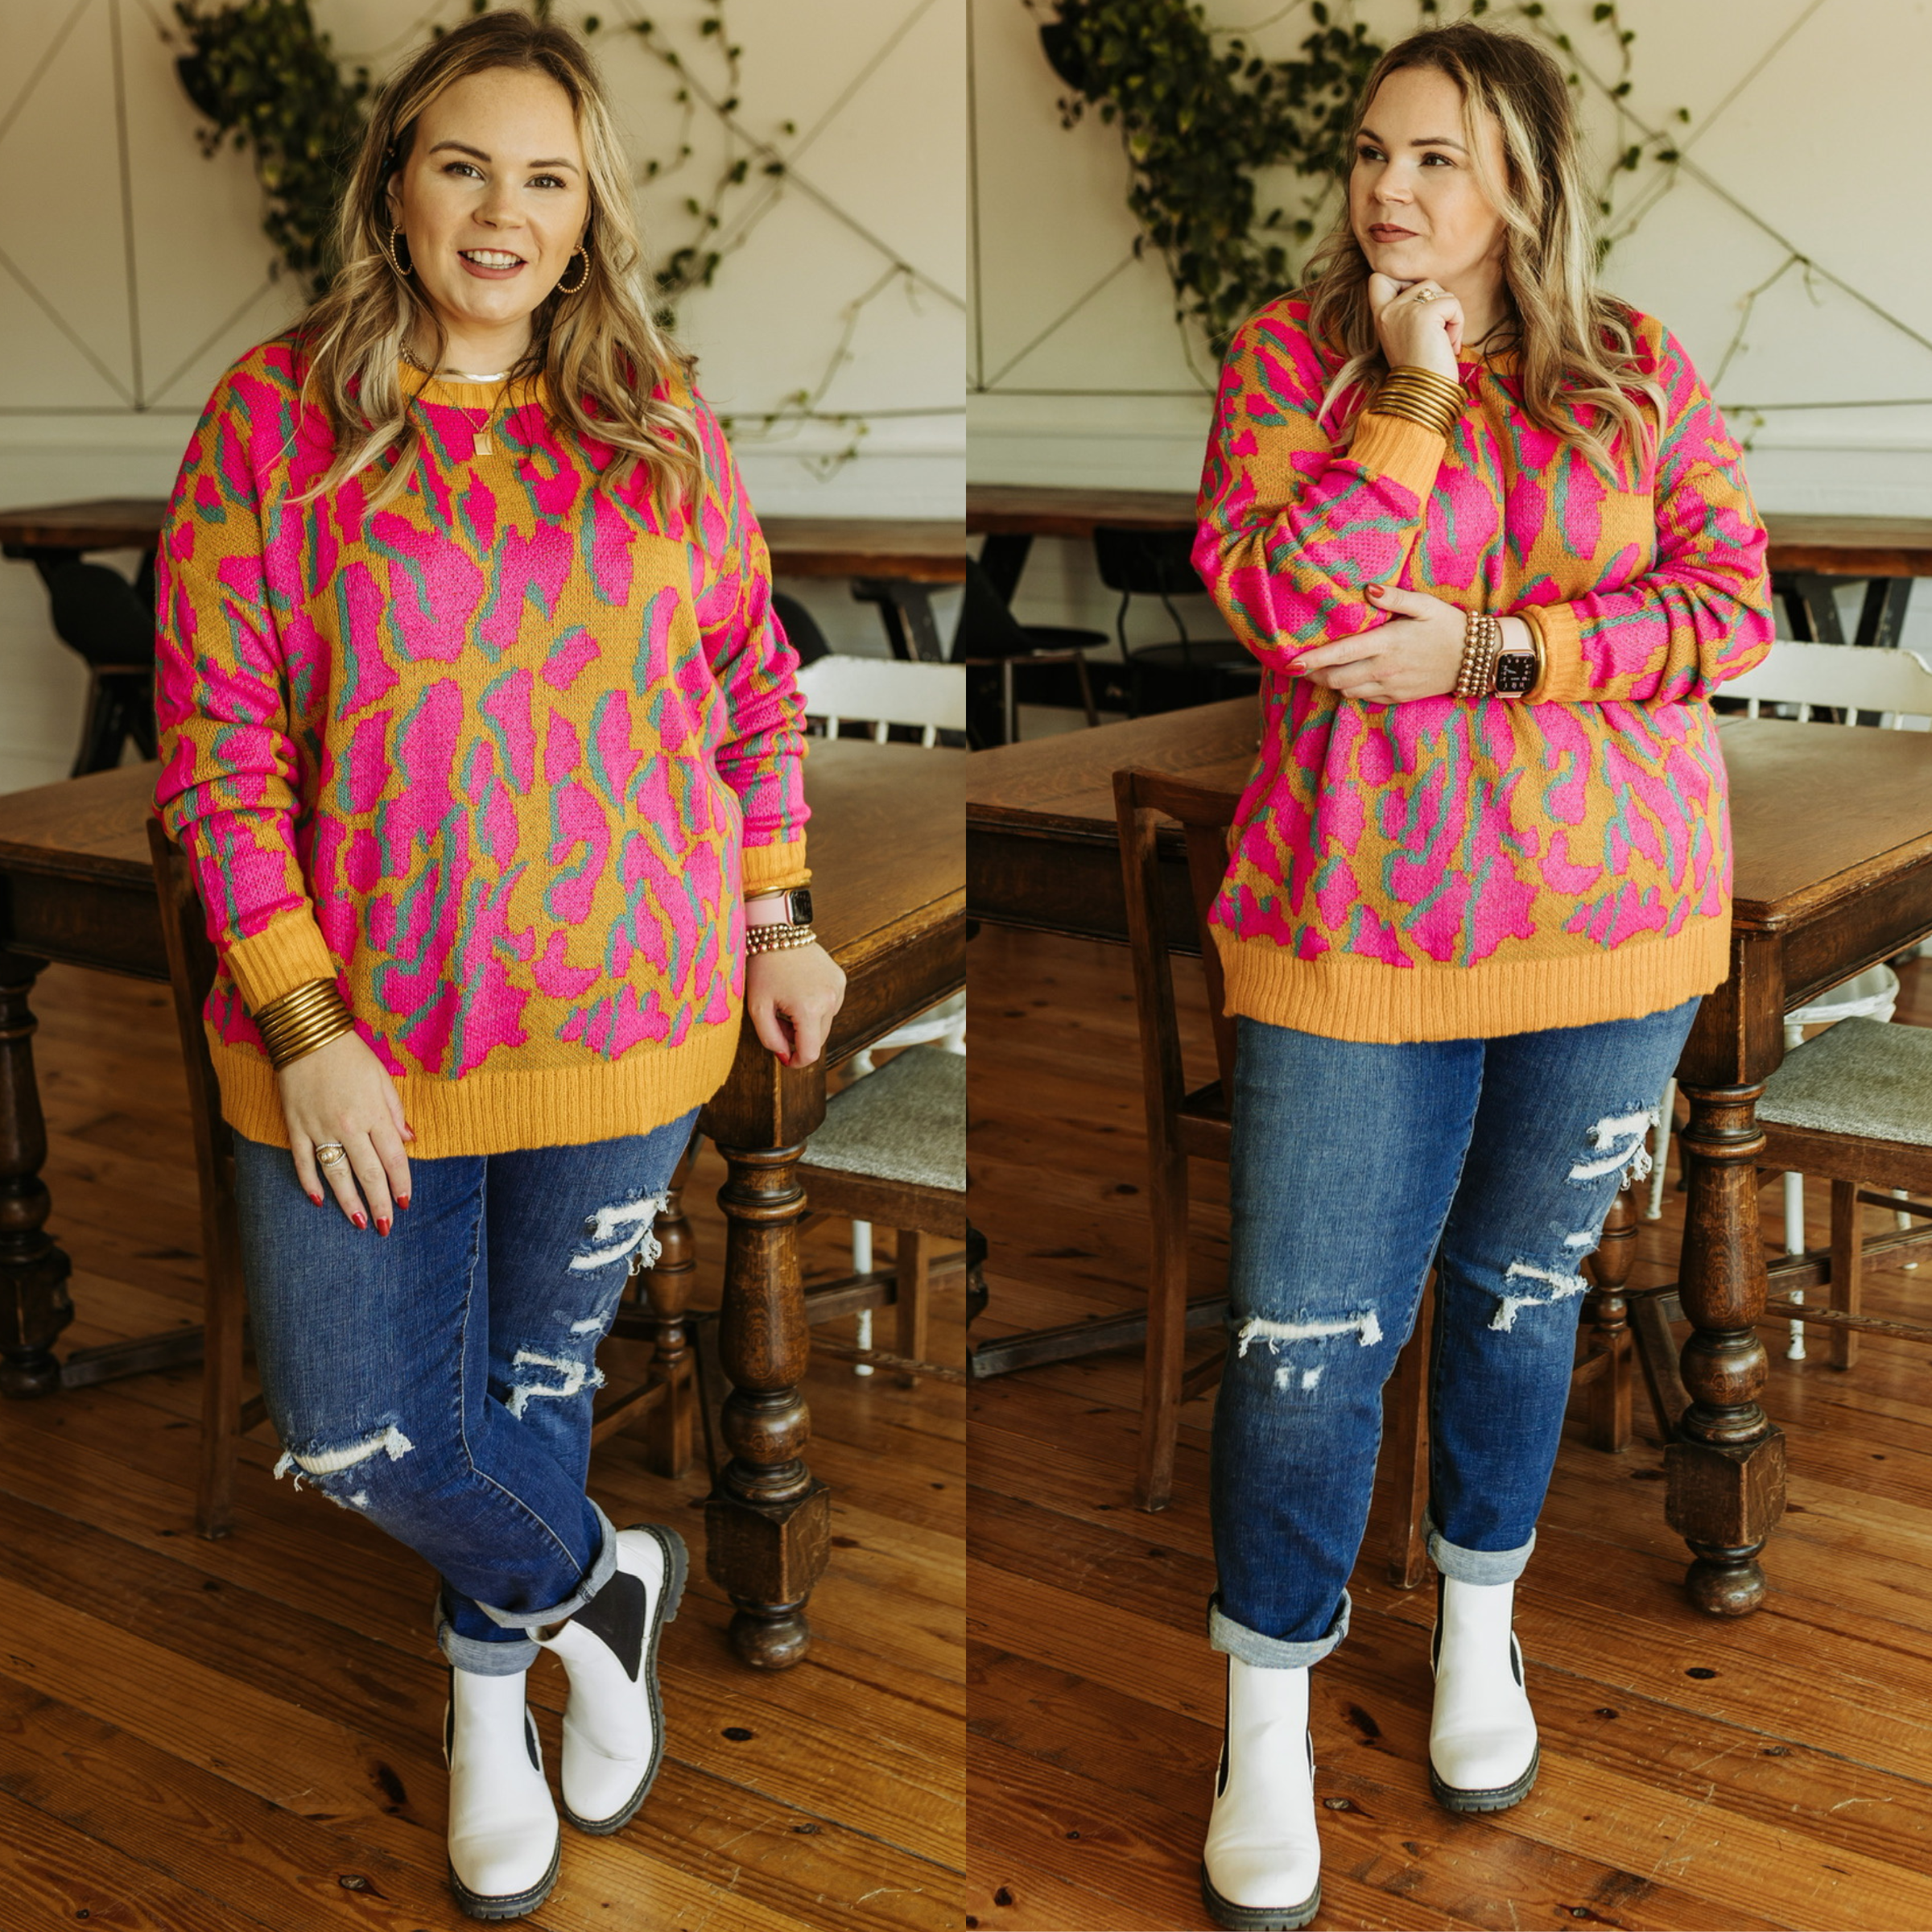 Model is wearing an animal print sweater that is a mix of neon pink, yellow, and turquosie. Model has it paried with dark wash boyfriend jeans, white booties, and gold jewelry.